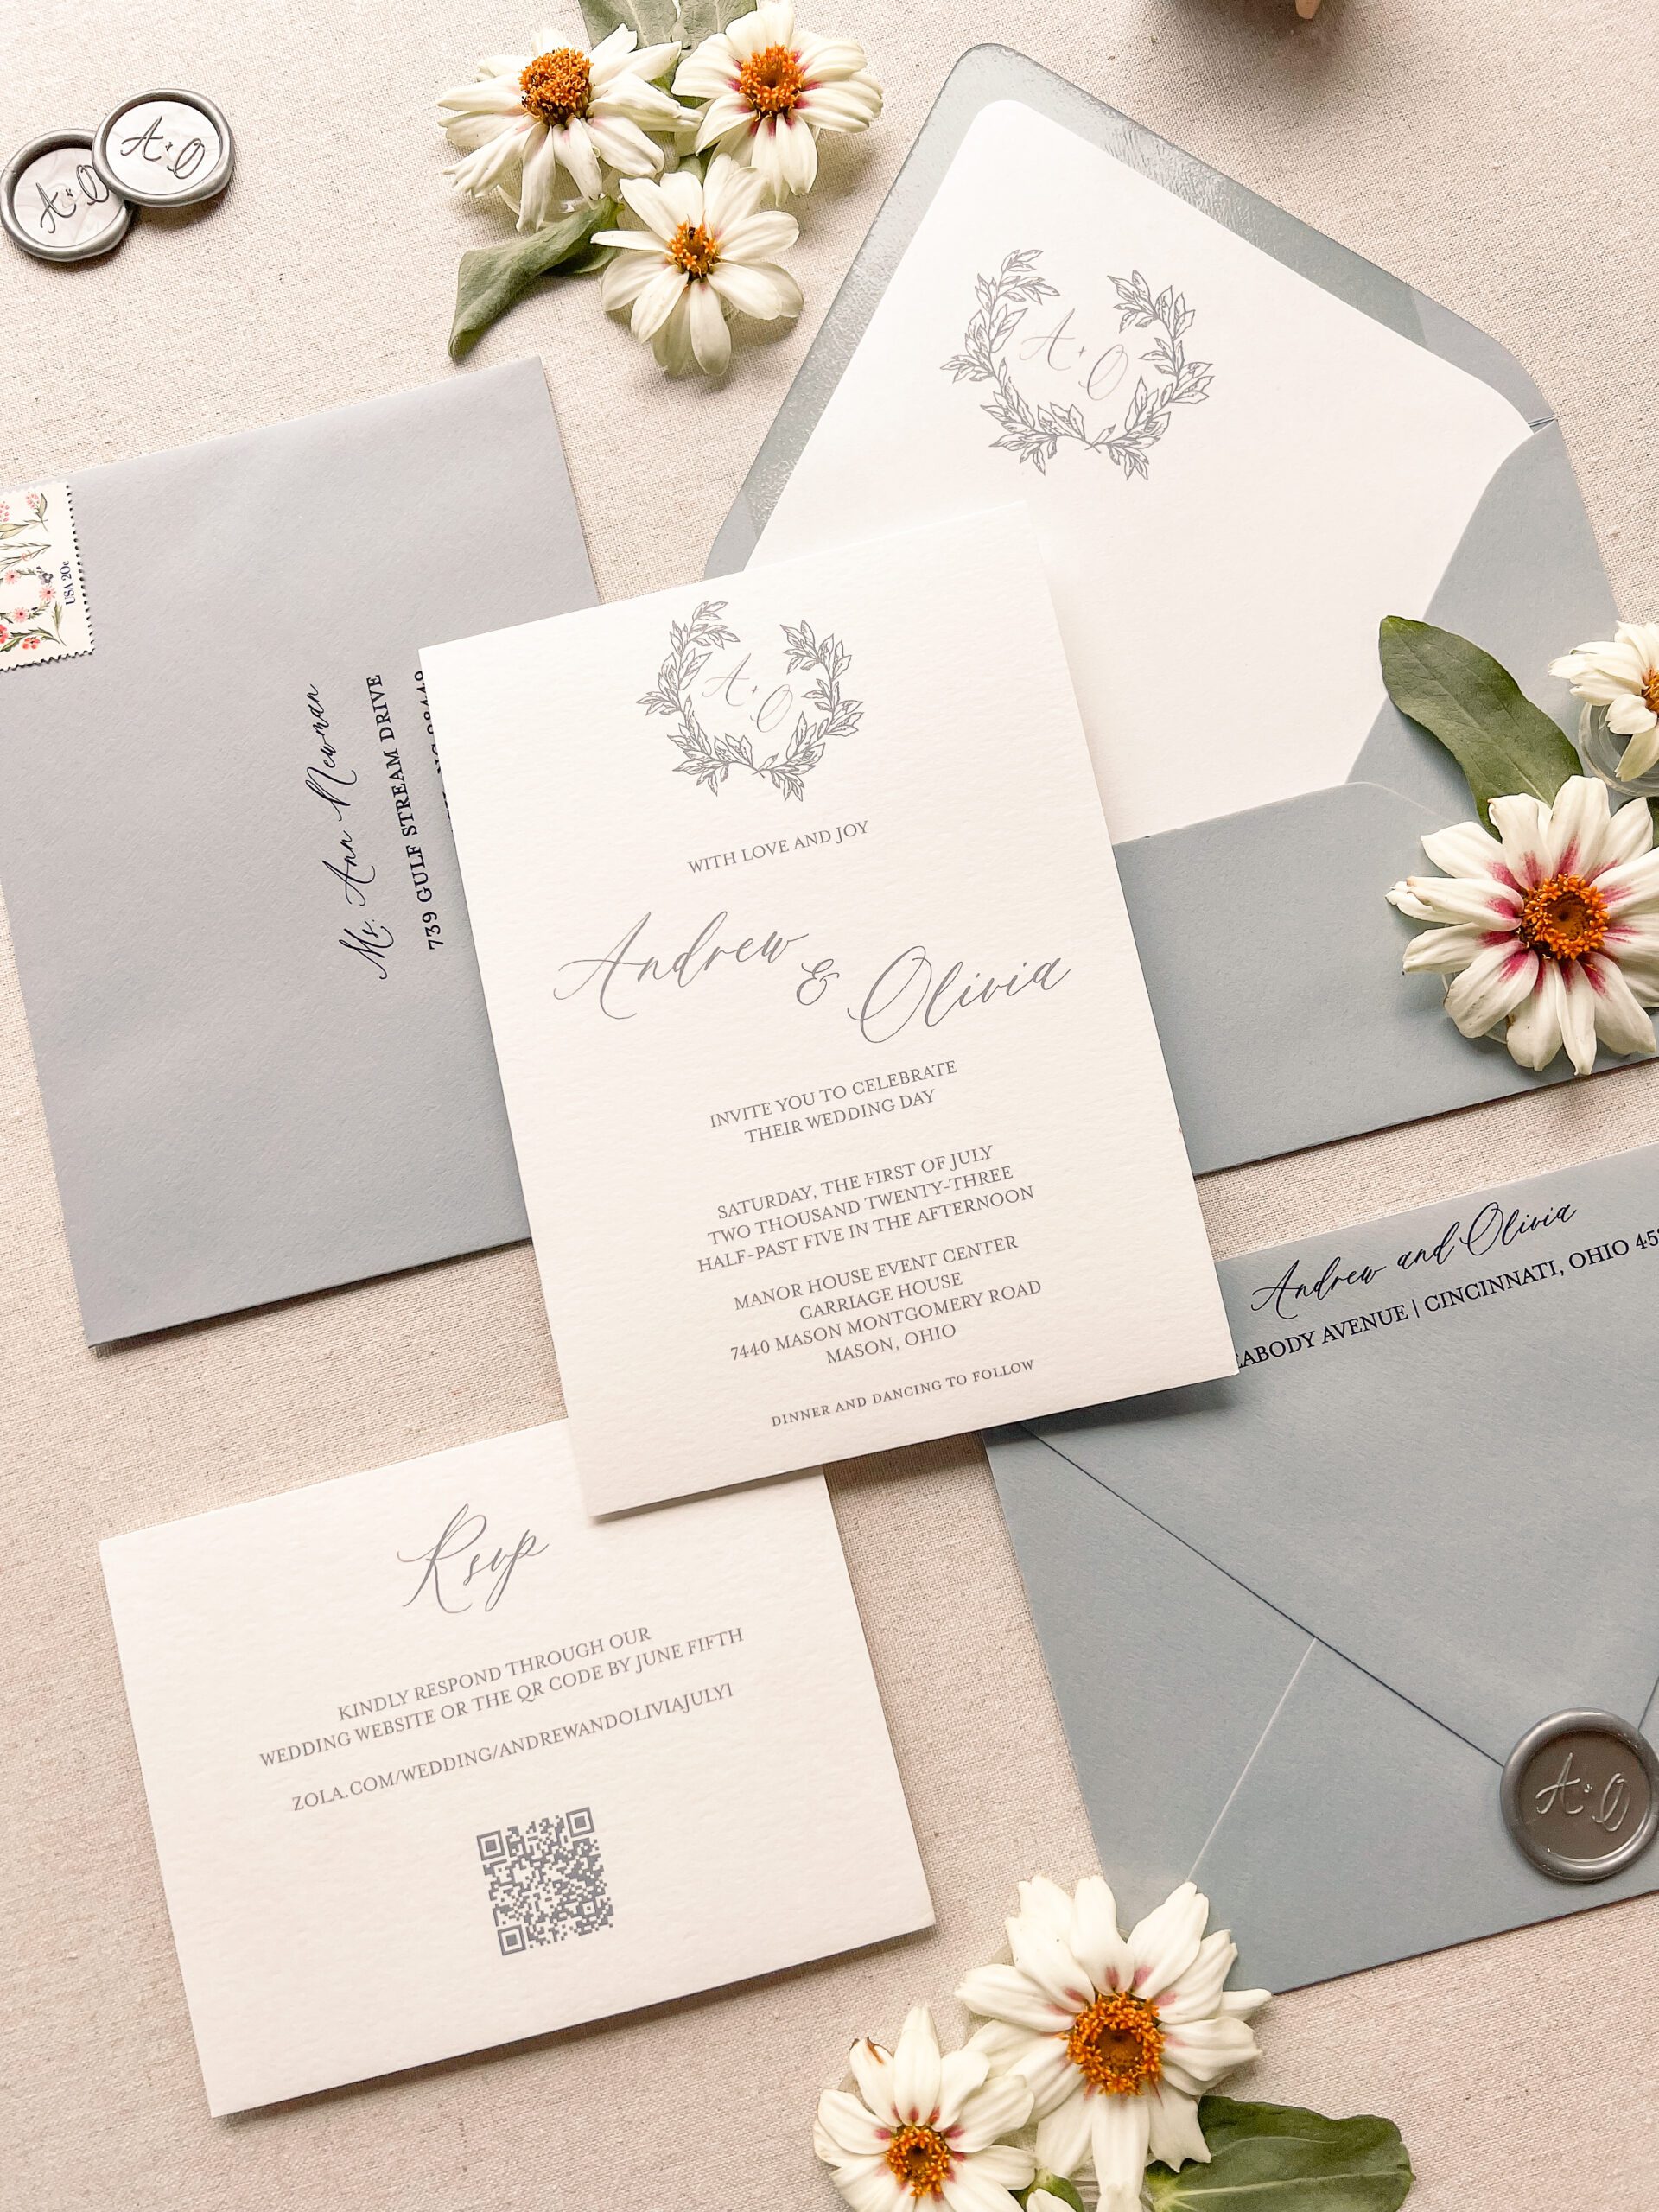 neutral wedding invitations with monogram is a top wedding invitations trend